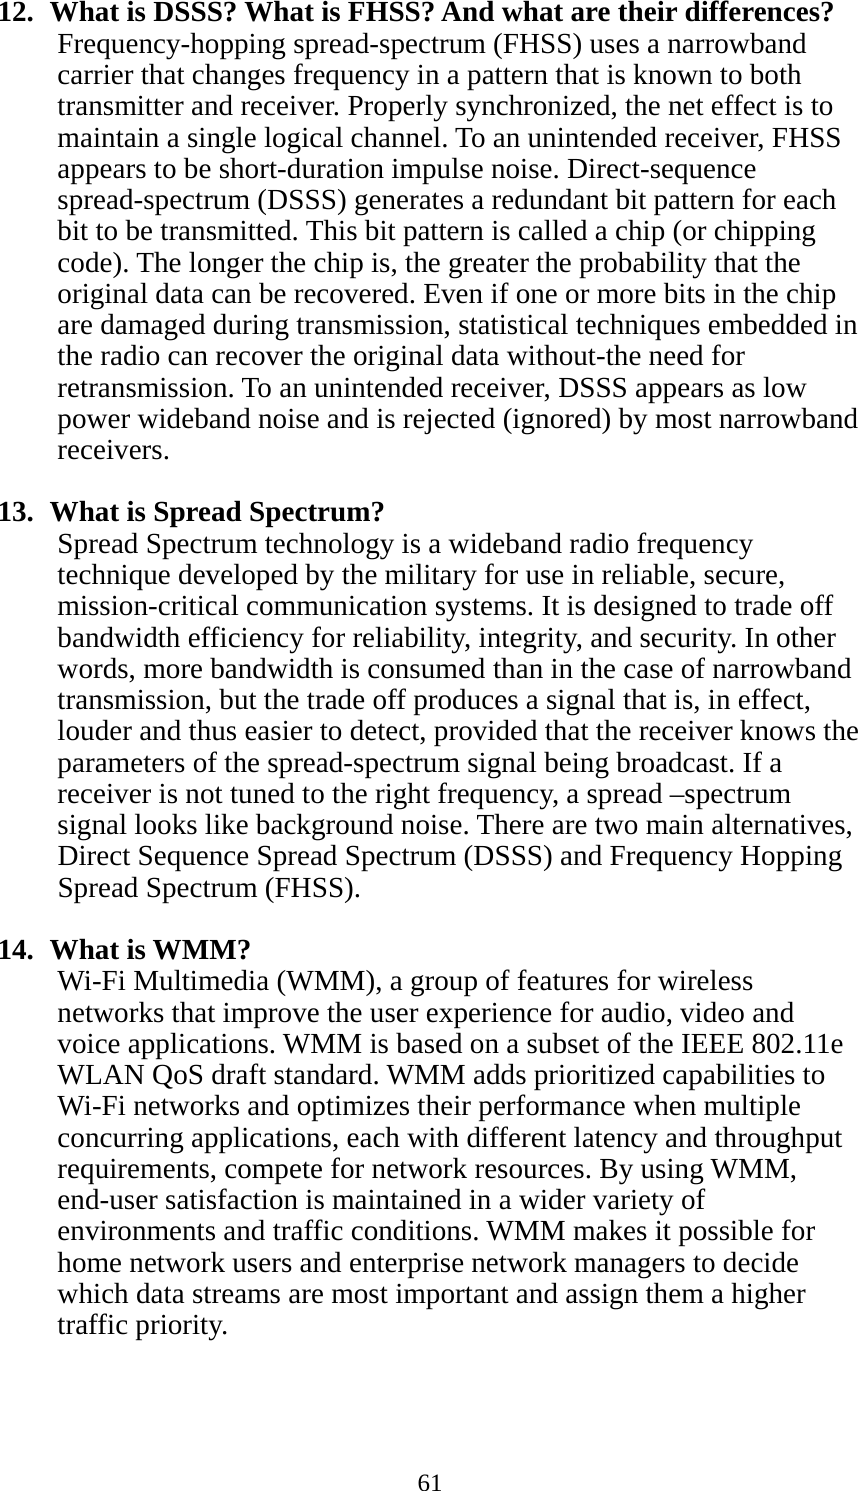  6112.   What is DSSS? What is FHSS? And what are their differences? Frequency-hopping spread-spectrum (FHSS) uses a narrowband carrier that changes frequency in a pattern that is known to both transmitter and receiver. Properly synchronized, the net effect is to maintain a single logical channel. To an unintended receiver, FHSS appears to be short-duration impulse noise. Direct-sequence spread-spectrum (DSSS) generates a redundant bit pattern for each bit to be transmitted. This bit pattern is called a chip (or chipping code). The longer the chip is, the greater the probability that the original data can be recovered. Even if one or more bits in the chip are damaged during transmission, statistical techniques embedded in the radio can recover the original data without-the need for retransmission. To an unintended receiver, DSSS appears as low power wideband noise and is rejected (ignored) by most narrowband receivers.  13.   What is Spread Spectrum? Spread Spectrum technology is a wideband radio frequency technique developed by the military for use in reliable, secure, mission-critical communication systems. It is designed to trade off bandwidth efficiency for reliability, integrity, and security. In other words, more bandwidth is consumed than in the case of narrowband transmission, but the trade off produces a signal that is, in effect, louder and thus easier to detect, provided that the receiver knows the parameters of the spread-spectrum signal being broadcast. If a receiver is not tuned to the right frequency, a spread –spectrum signal looks like background noise. There are two main alternatives, Direct Sequence Spread Spectrum (DSSS) and Frequency Hopping Spread Spectrum (FHSS).  14.  What is WMM? Wi-Fi Multimedia (WMM), a group of features for wireless networks that improve the user experience for audio, video and voice applications. WMM is based on a subset of the IEEE 802.11e WLAN QoS draft standard. WMM adds prioritized capabilities to Wi-Fi networks and optimizes their performance when multiple concurring applications, each with different latency and throughput requirements, compete for network resources. By using WMM, end-user satisfaction is maintained in a wider variety of environments and traffic conditions. WMM makes it possible for home network users and enterprise network managers to decide which data streams are most important and assign them a higher traffic priority.    